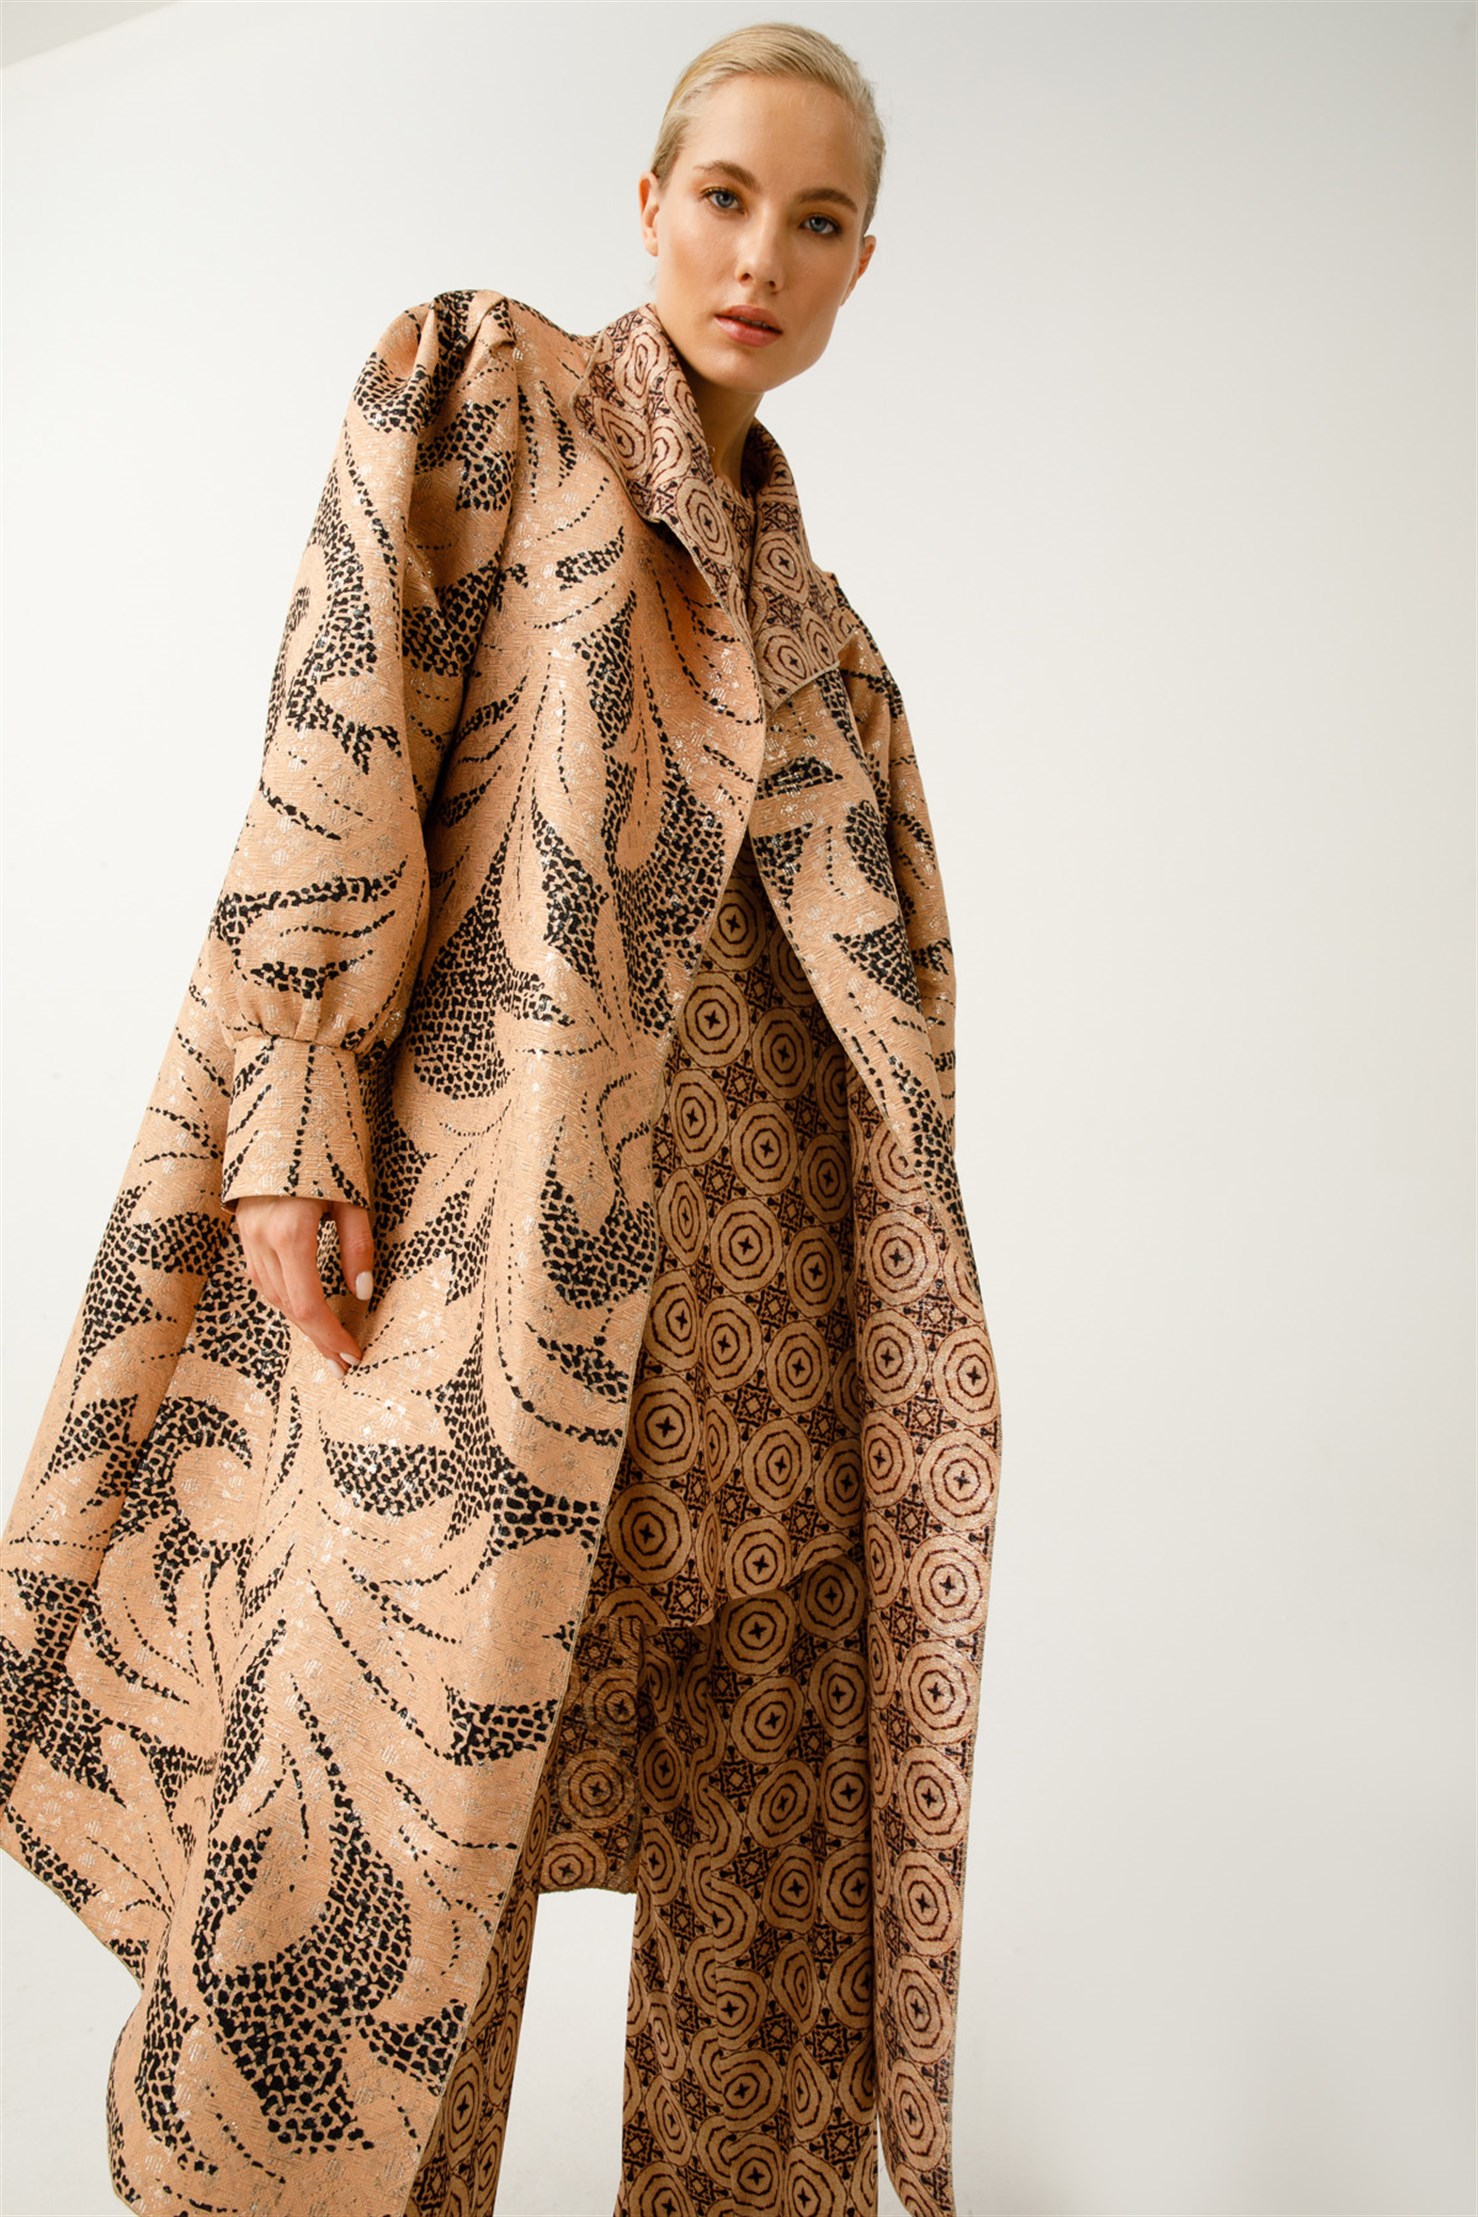 JACQUARD WING PATTERN DOUBLE-SIDED WIDE COLLAR JACKET